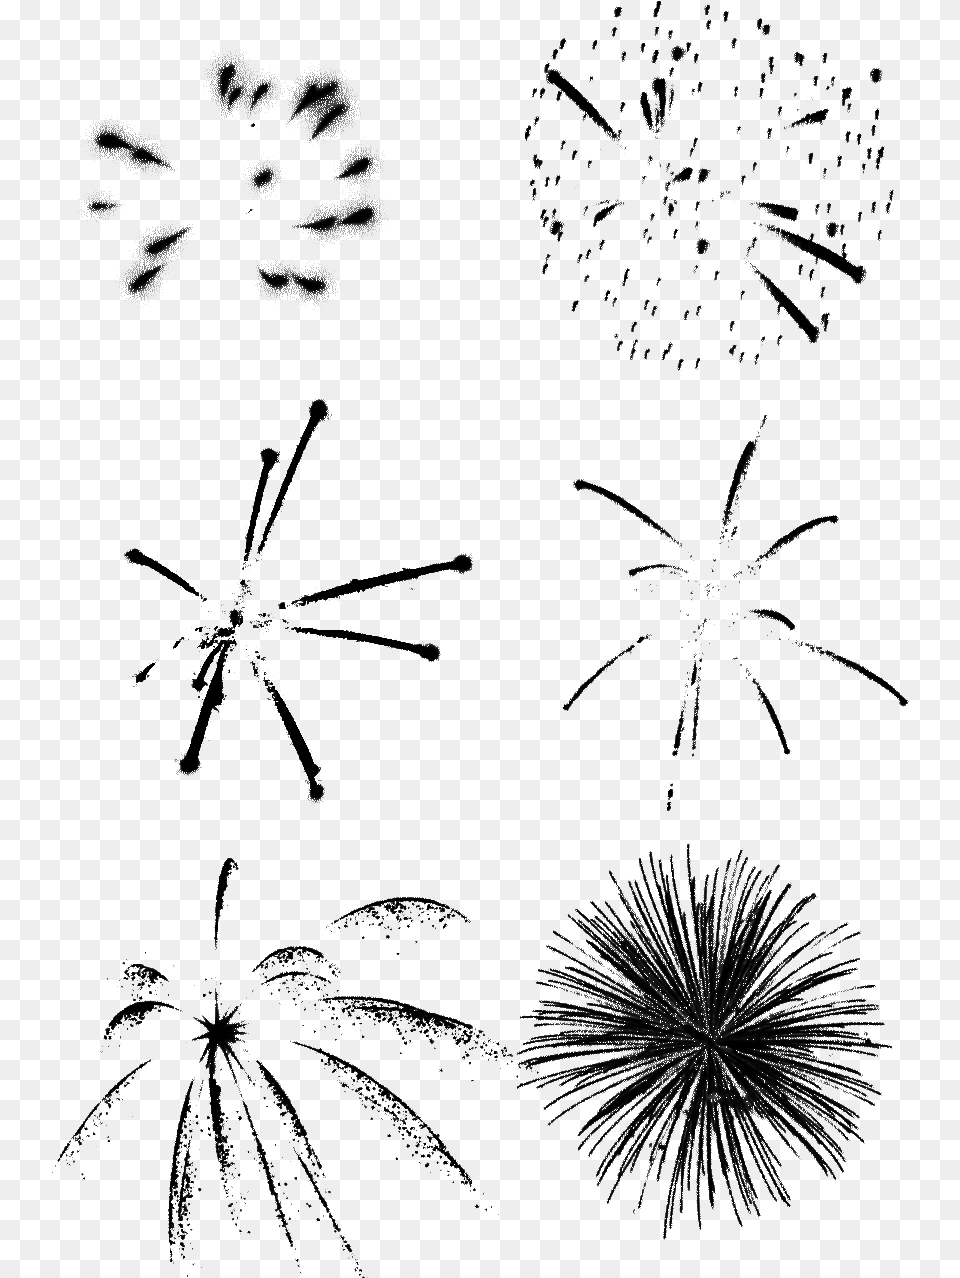 Black Fireworks Chinese New Year Festive Vector Black Fireworks Vector, Animal, Invertebrate, Spider, Outdoors Png